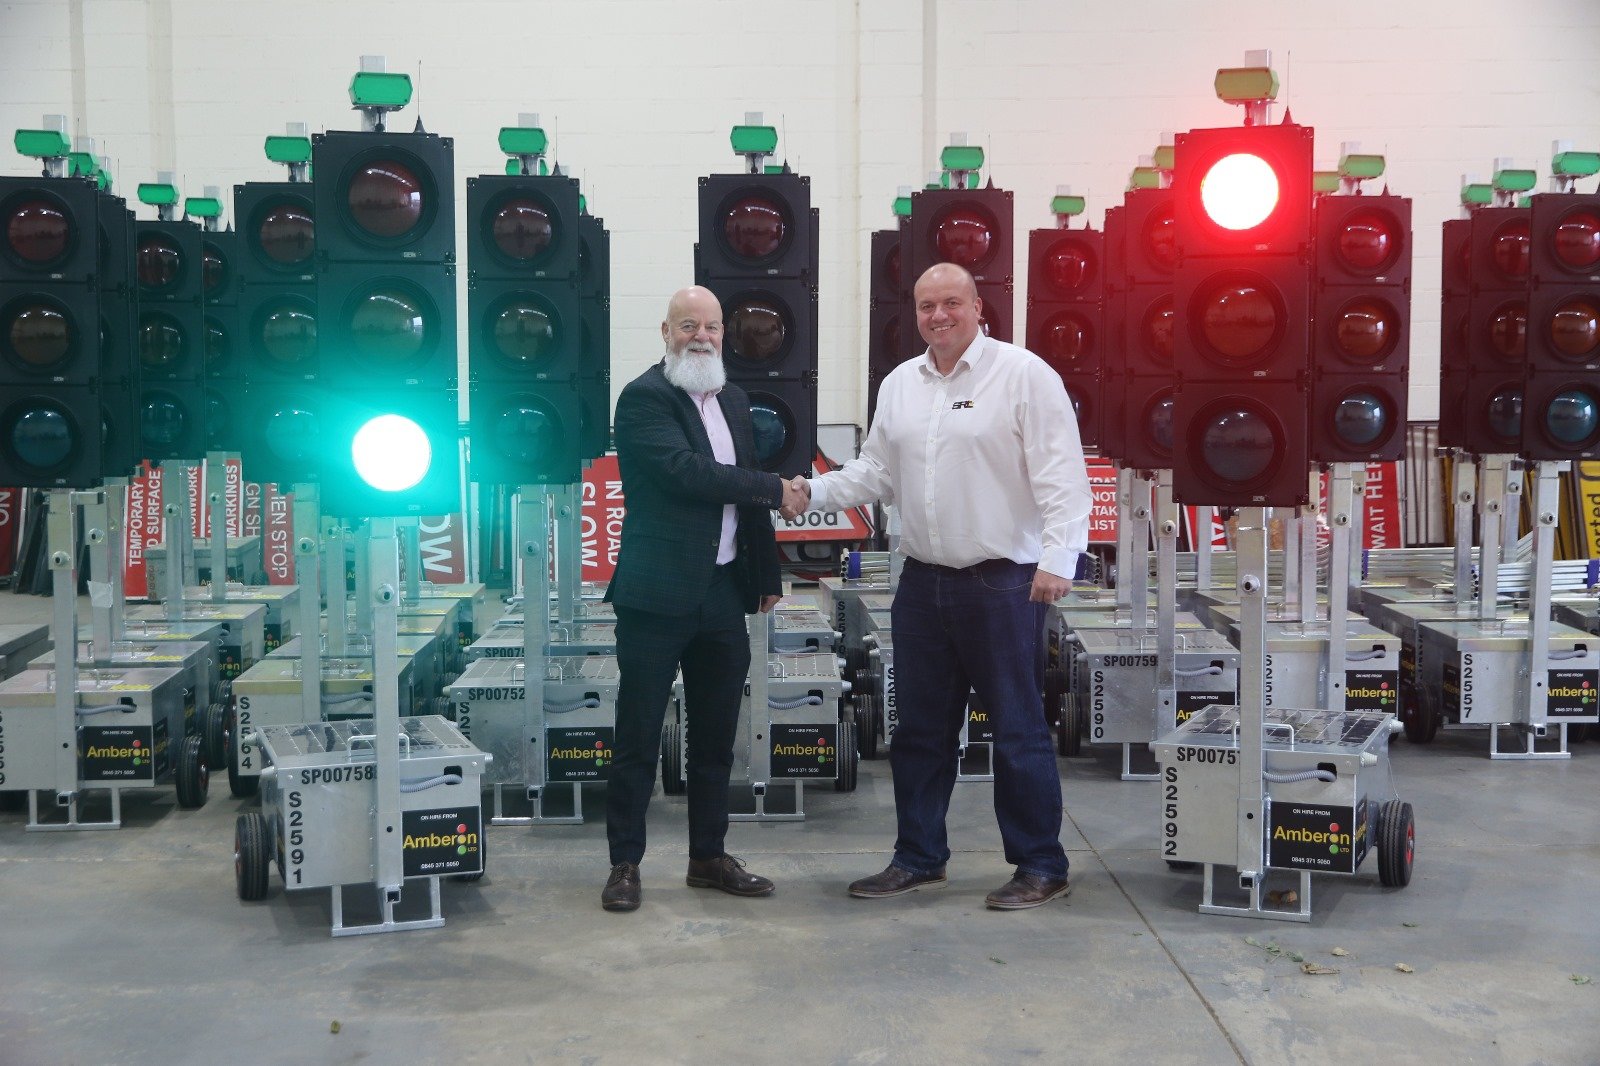 Core Highways invests £1m for 237 SRL portable traffic light systems - Core Highways